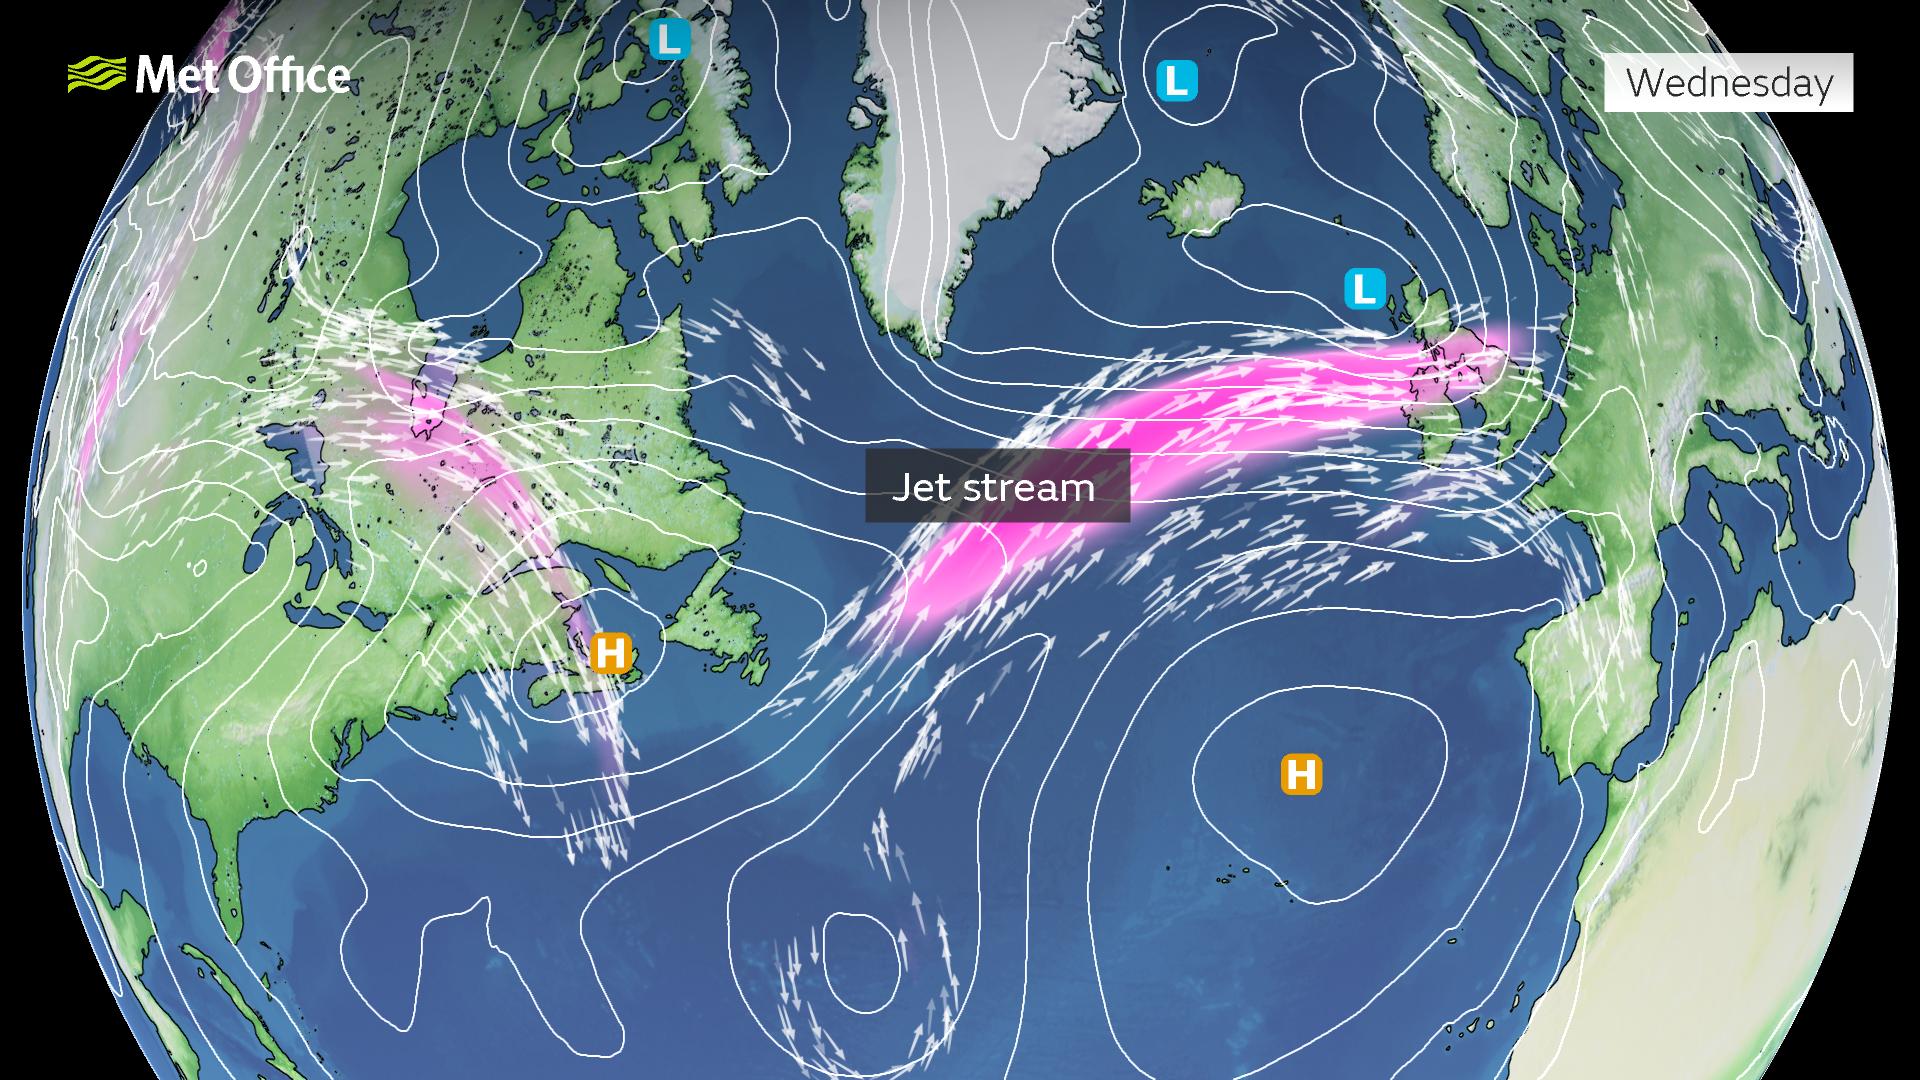 Jet stream to bring unsettled weather to the UK